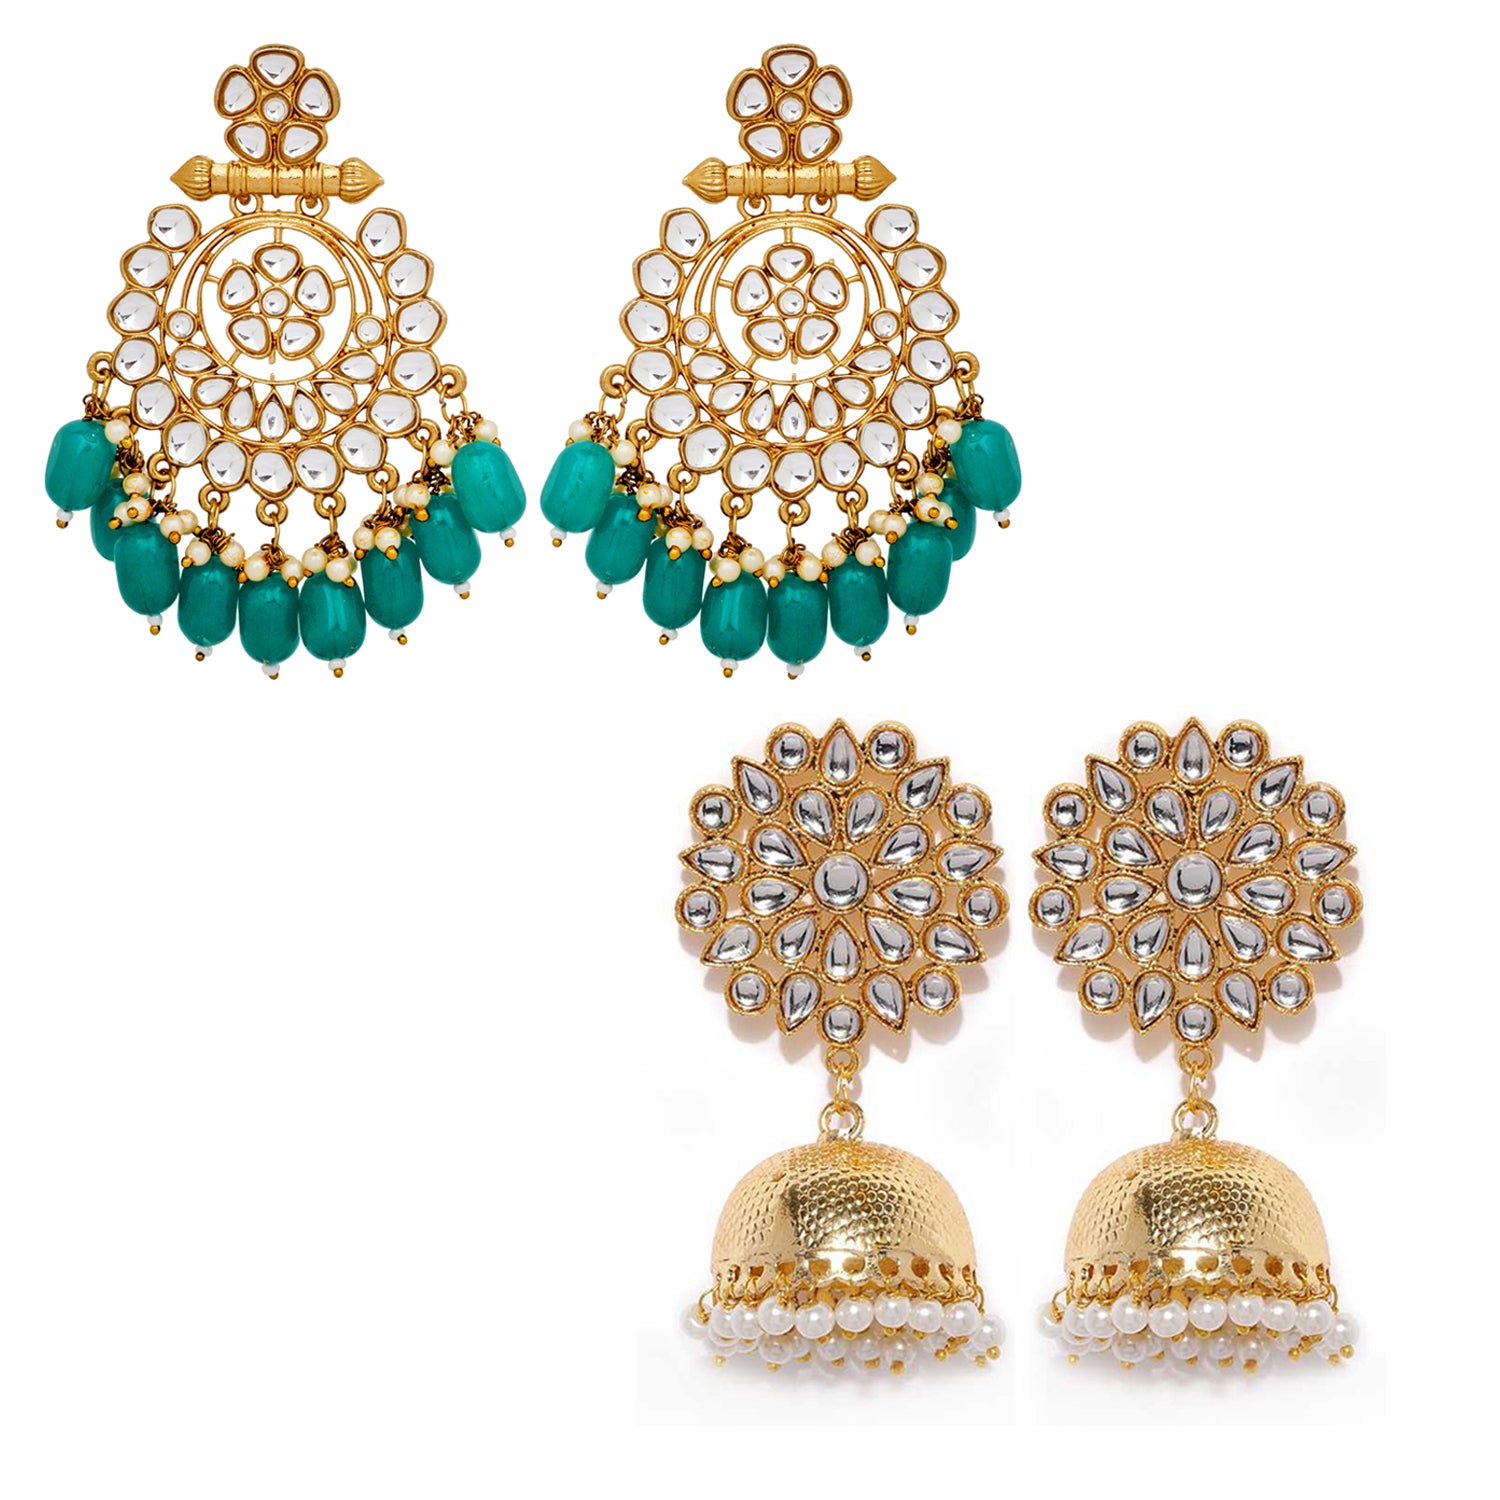 Combo of 2 Pairs of Traditional Dangler and Floral Jhumki Earrings